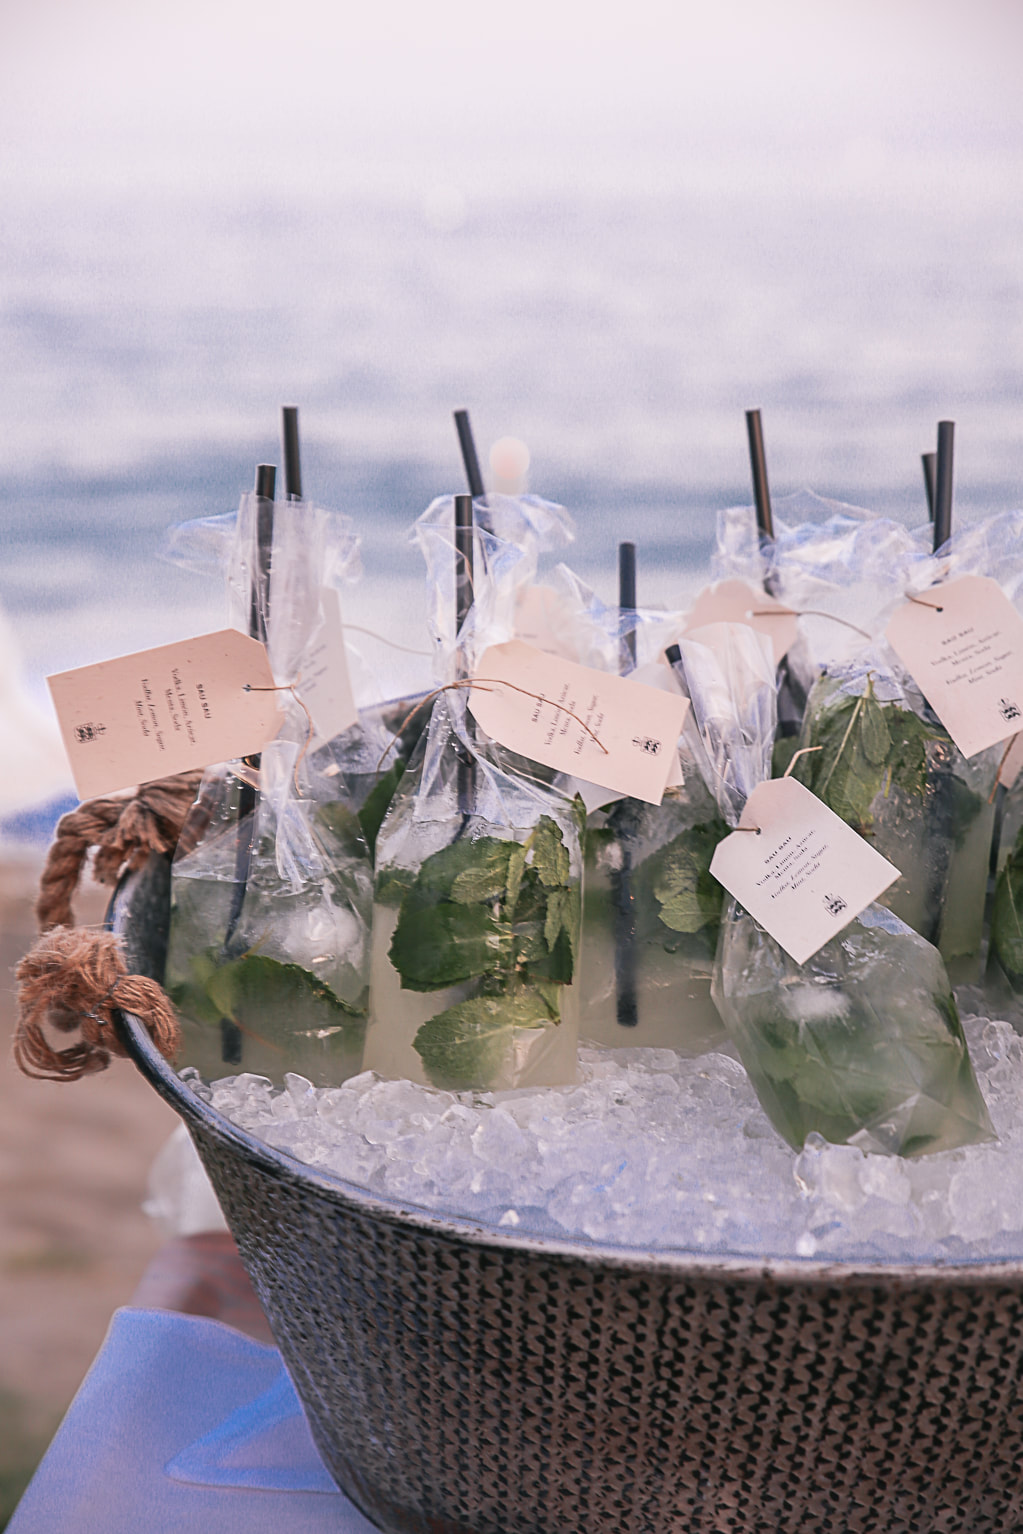 San Juan celebrations at the Marbella club hotel, Marbella by The Belle Blog